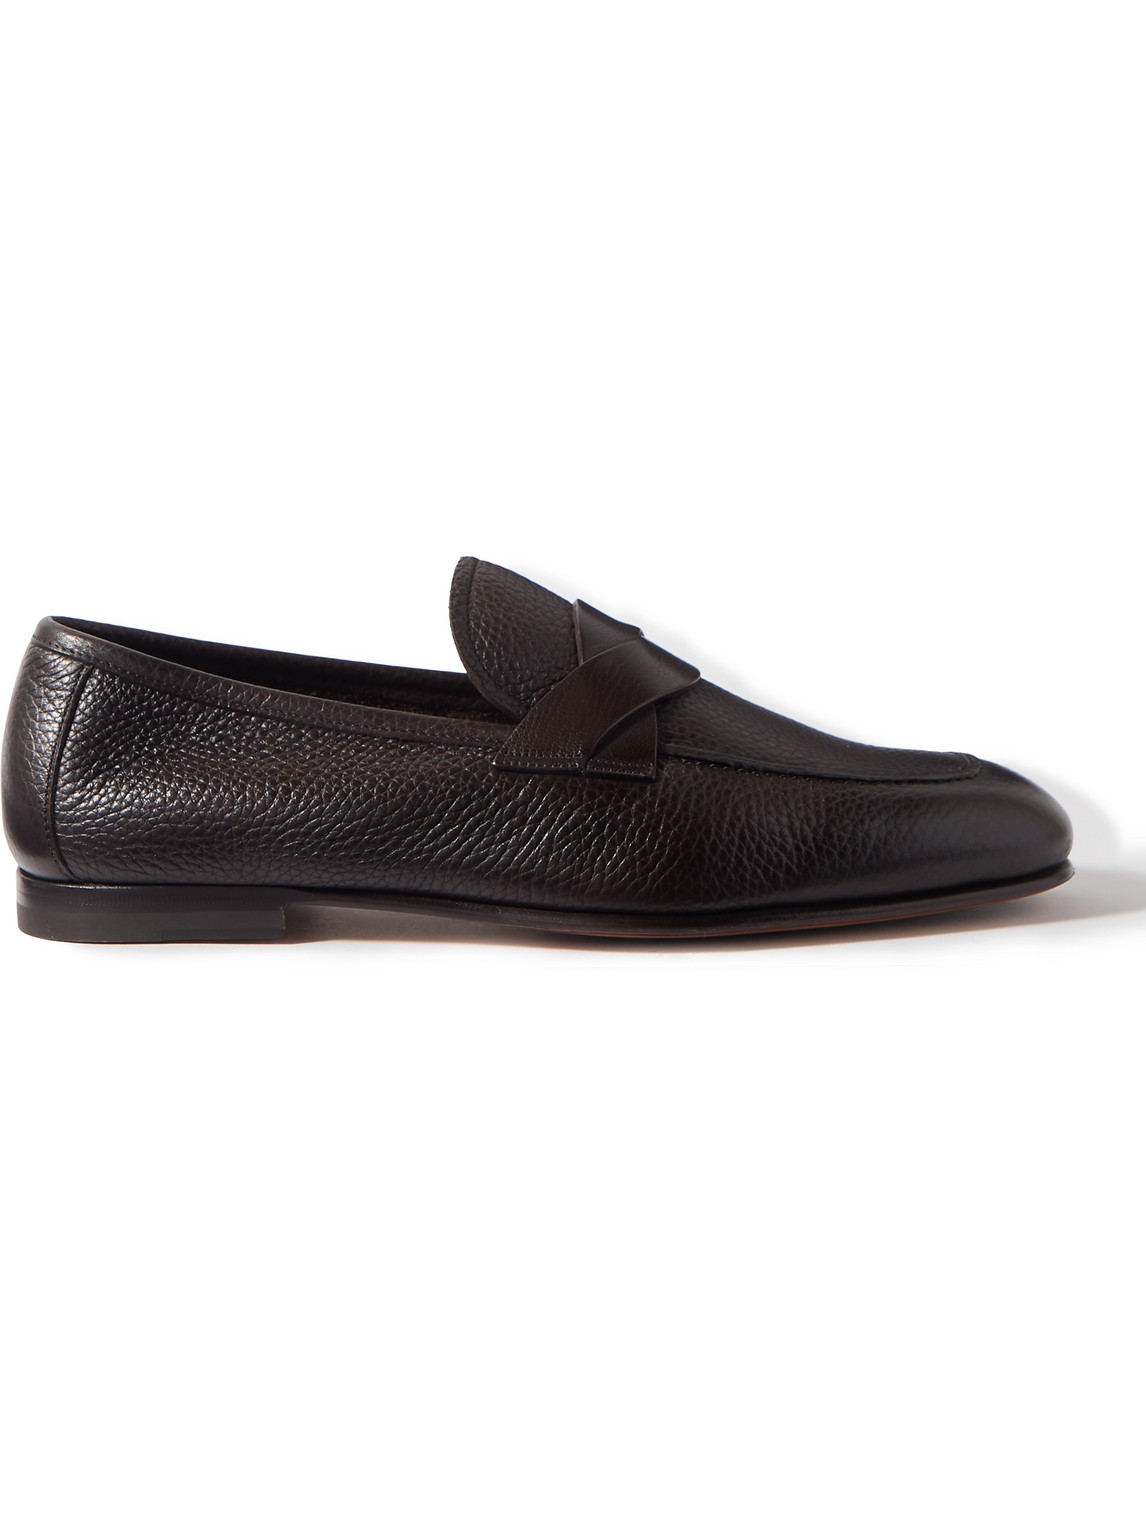 TOM FORD SEAN FULL-GRAIN LEATHER LOAFERS